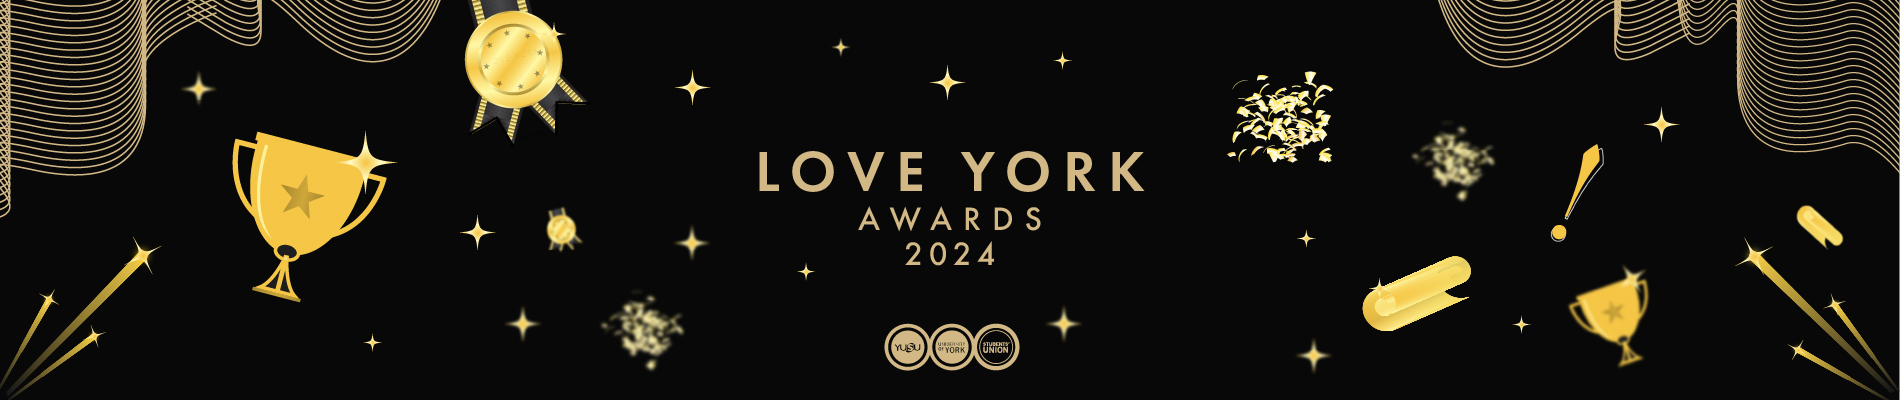 Love York Awards 2024. Nominations now open